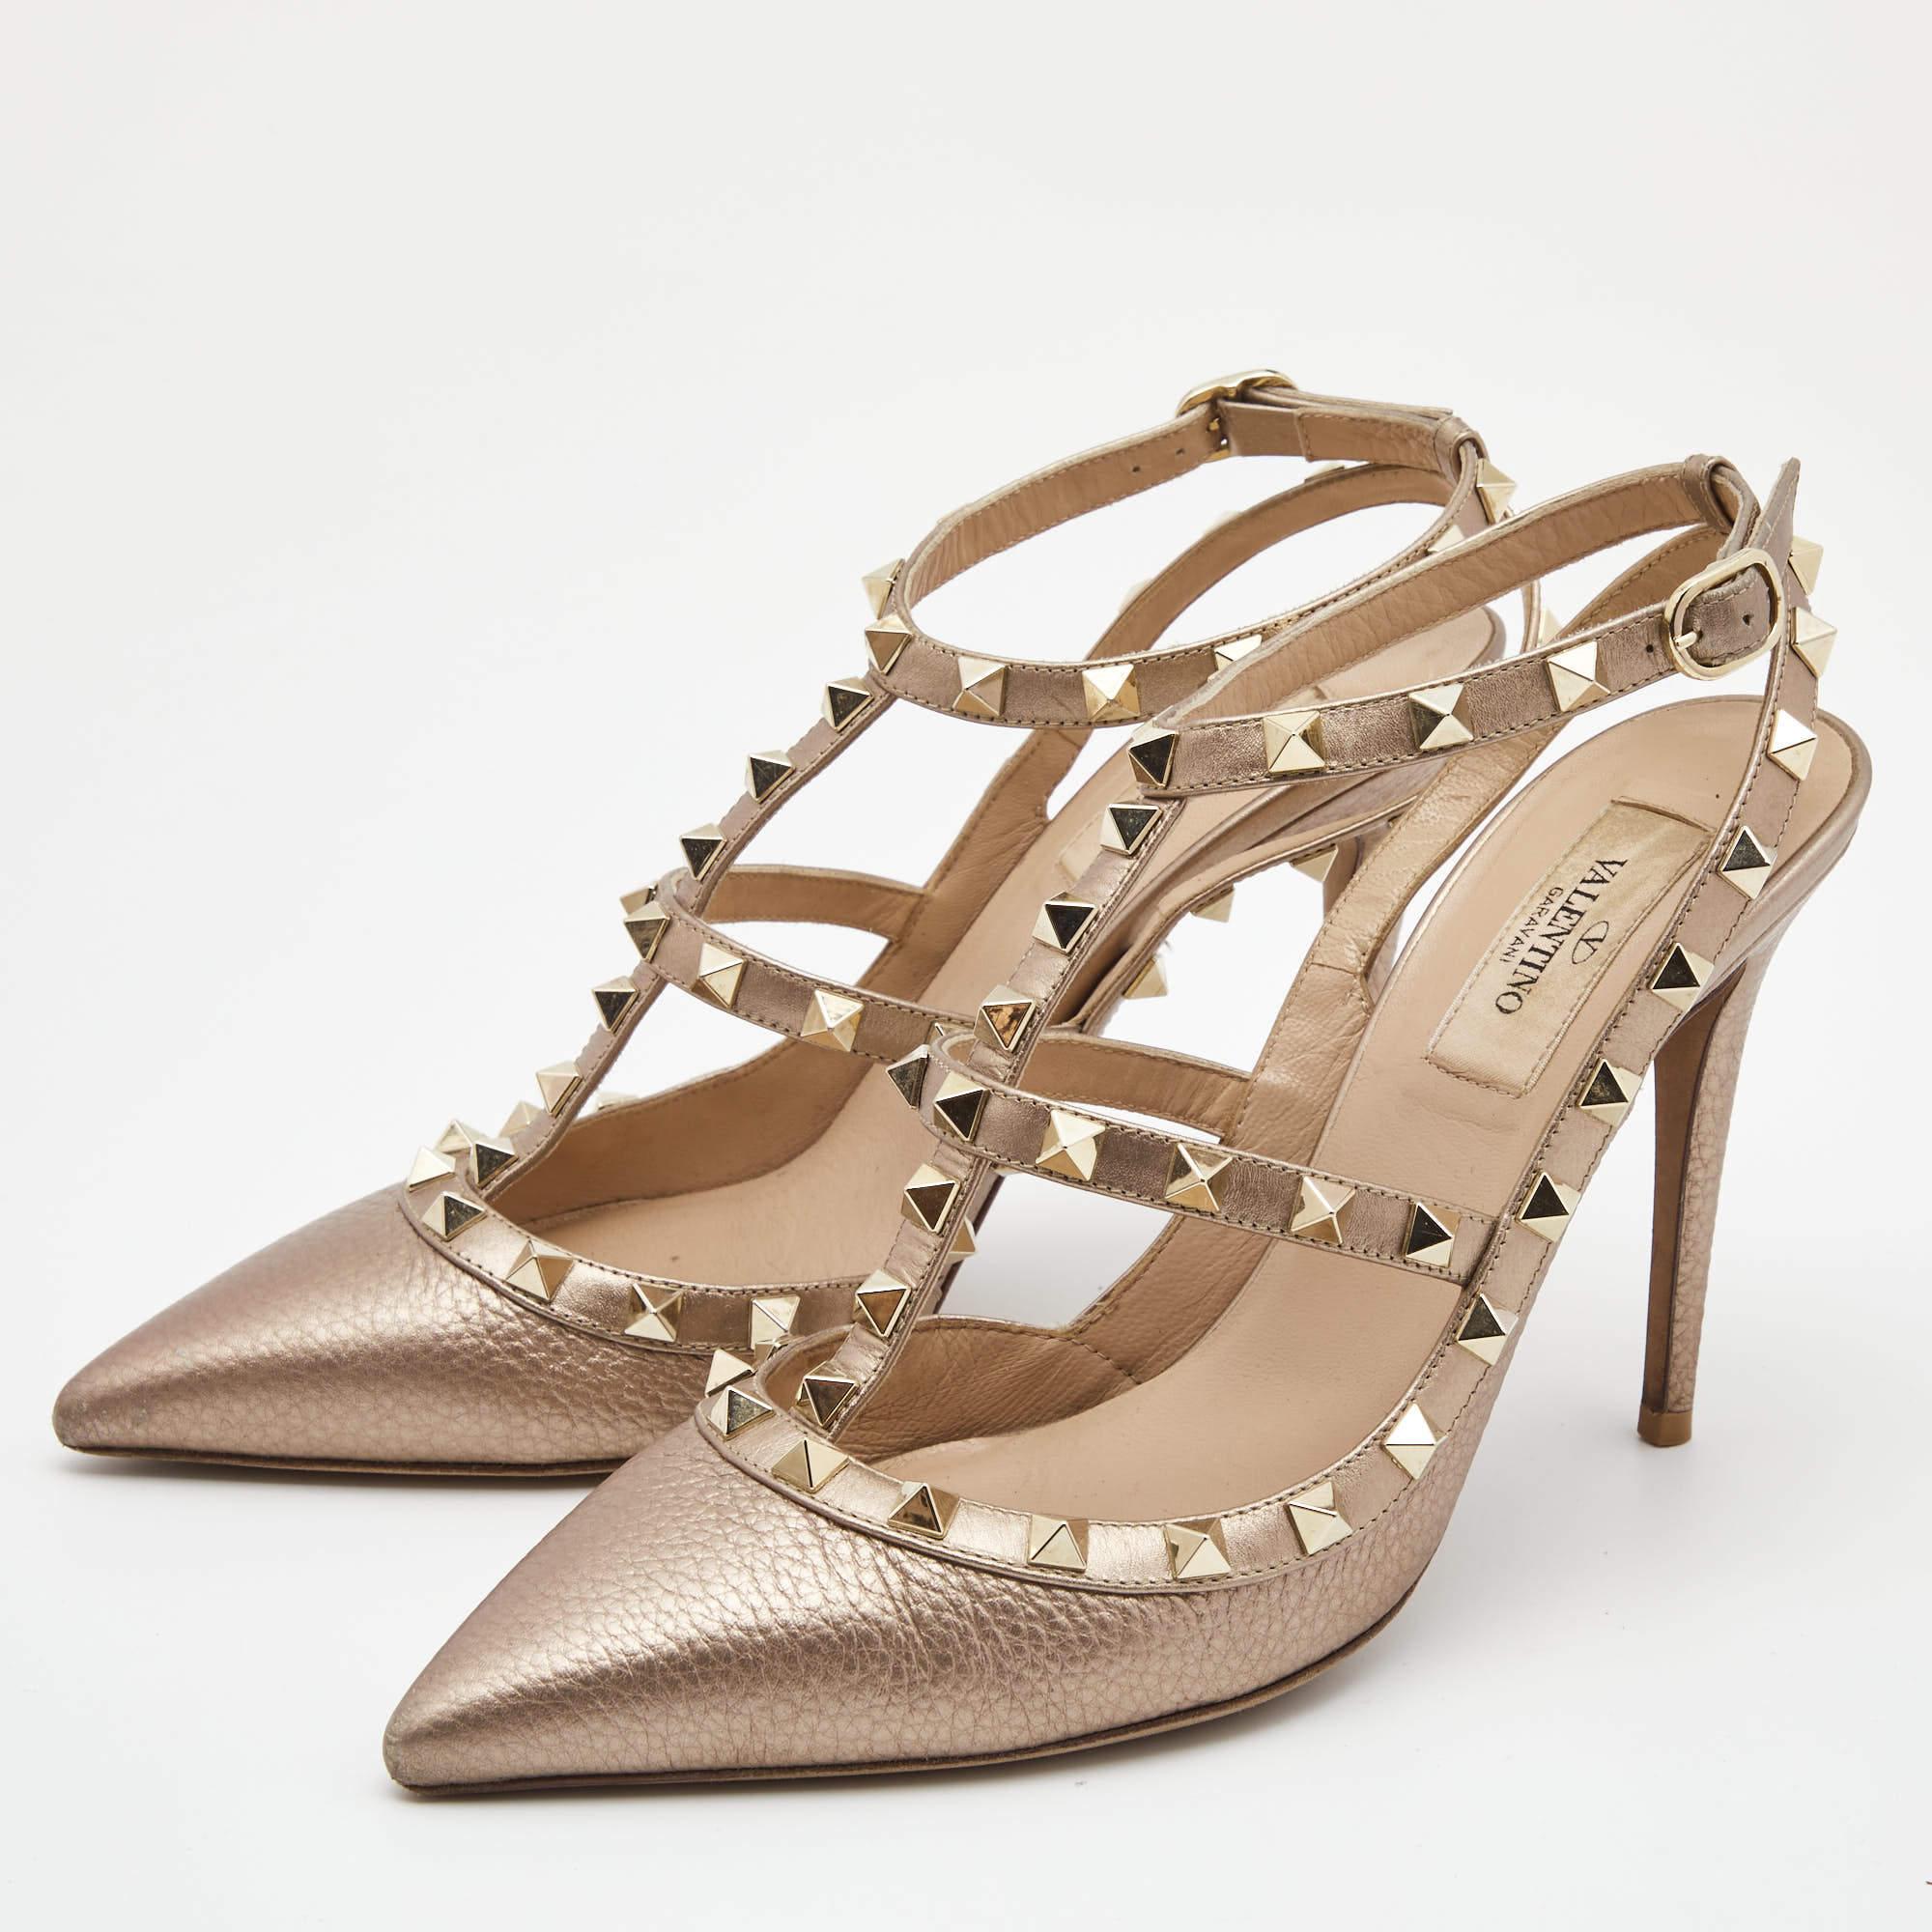 Valentino Metallic Leather Rockstud Strappy Pointed Toe Pumps Size 39 1